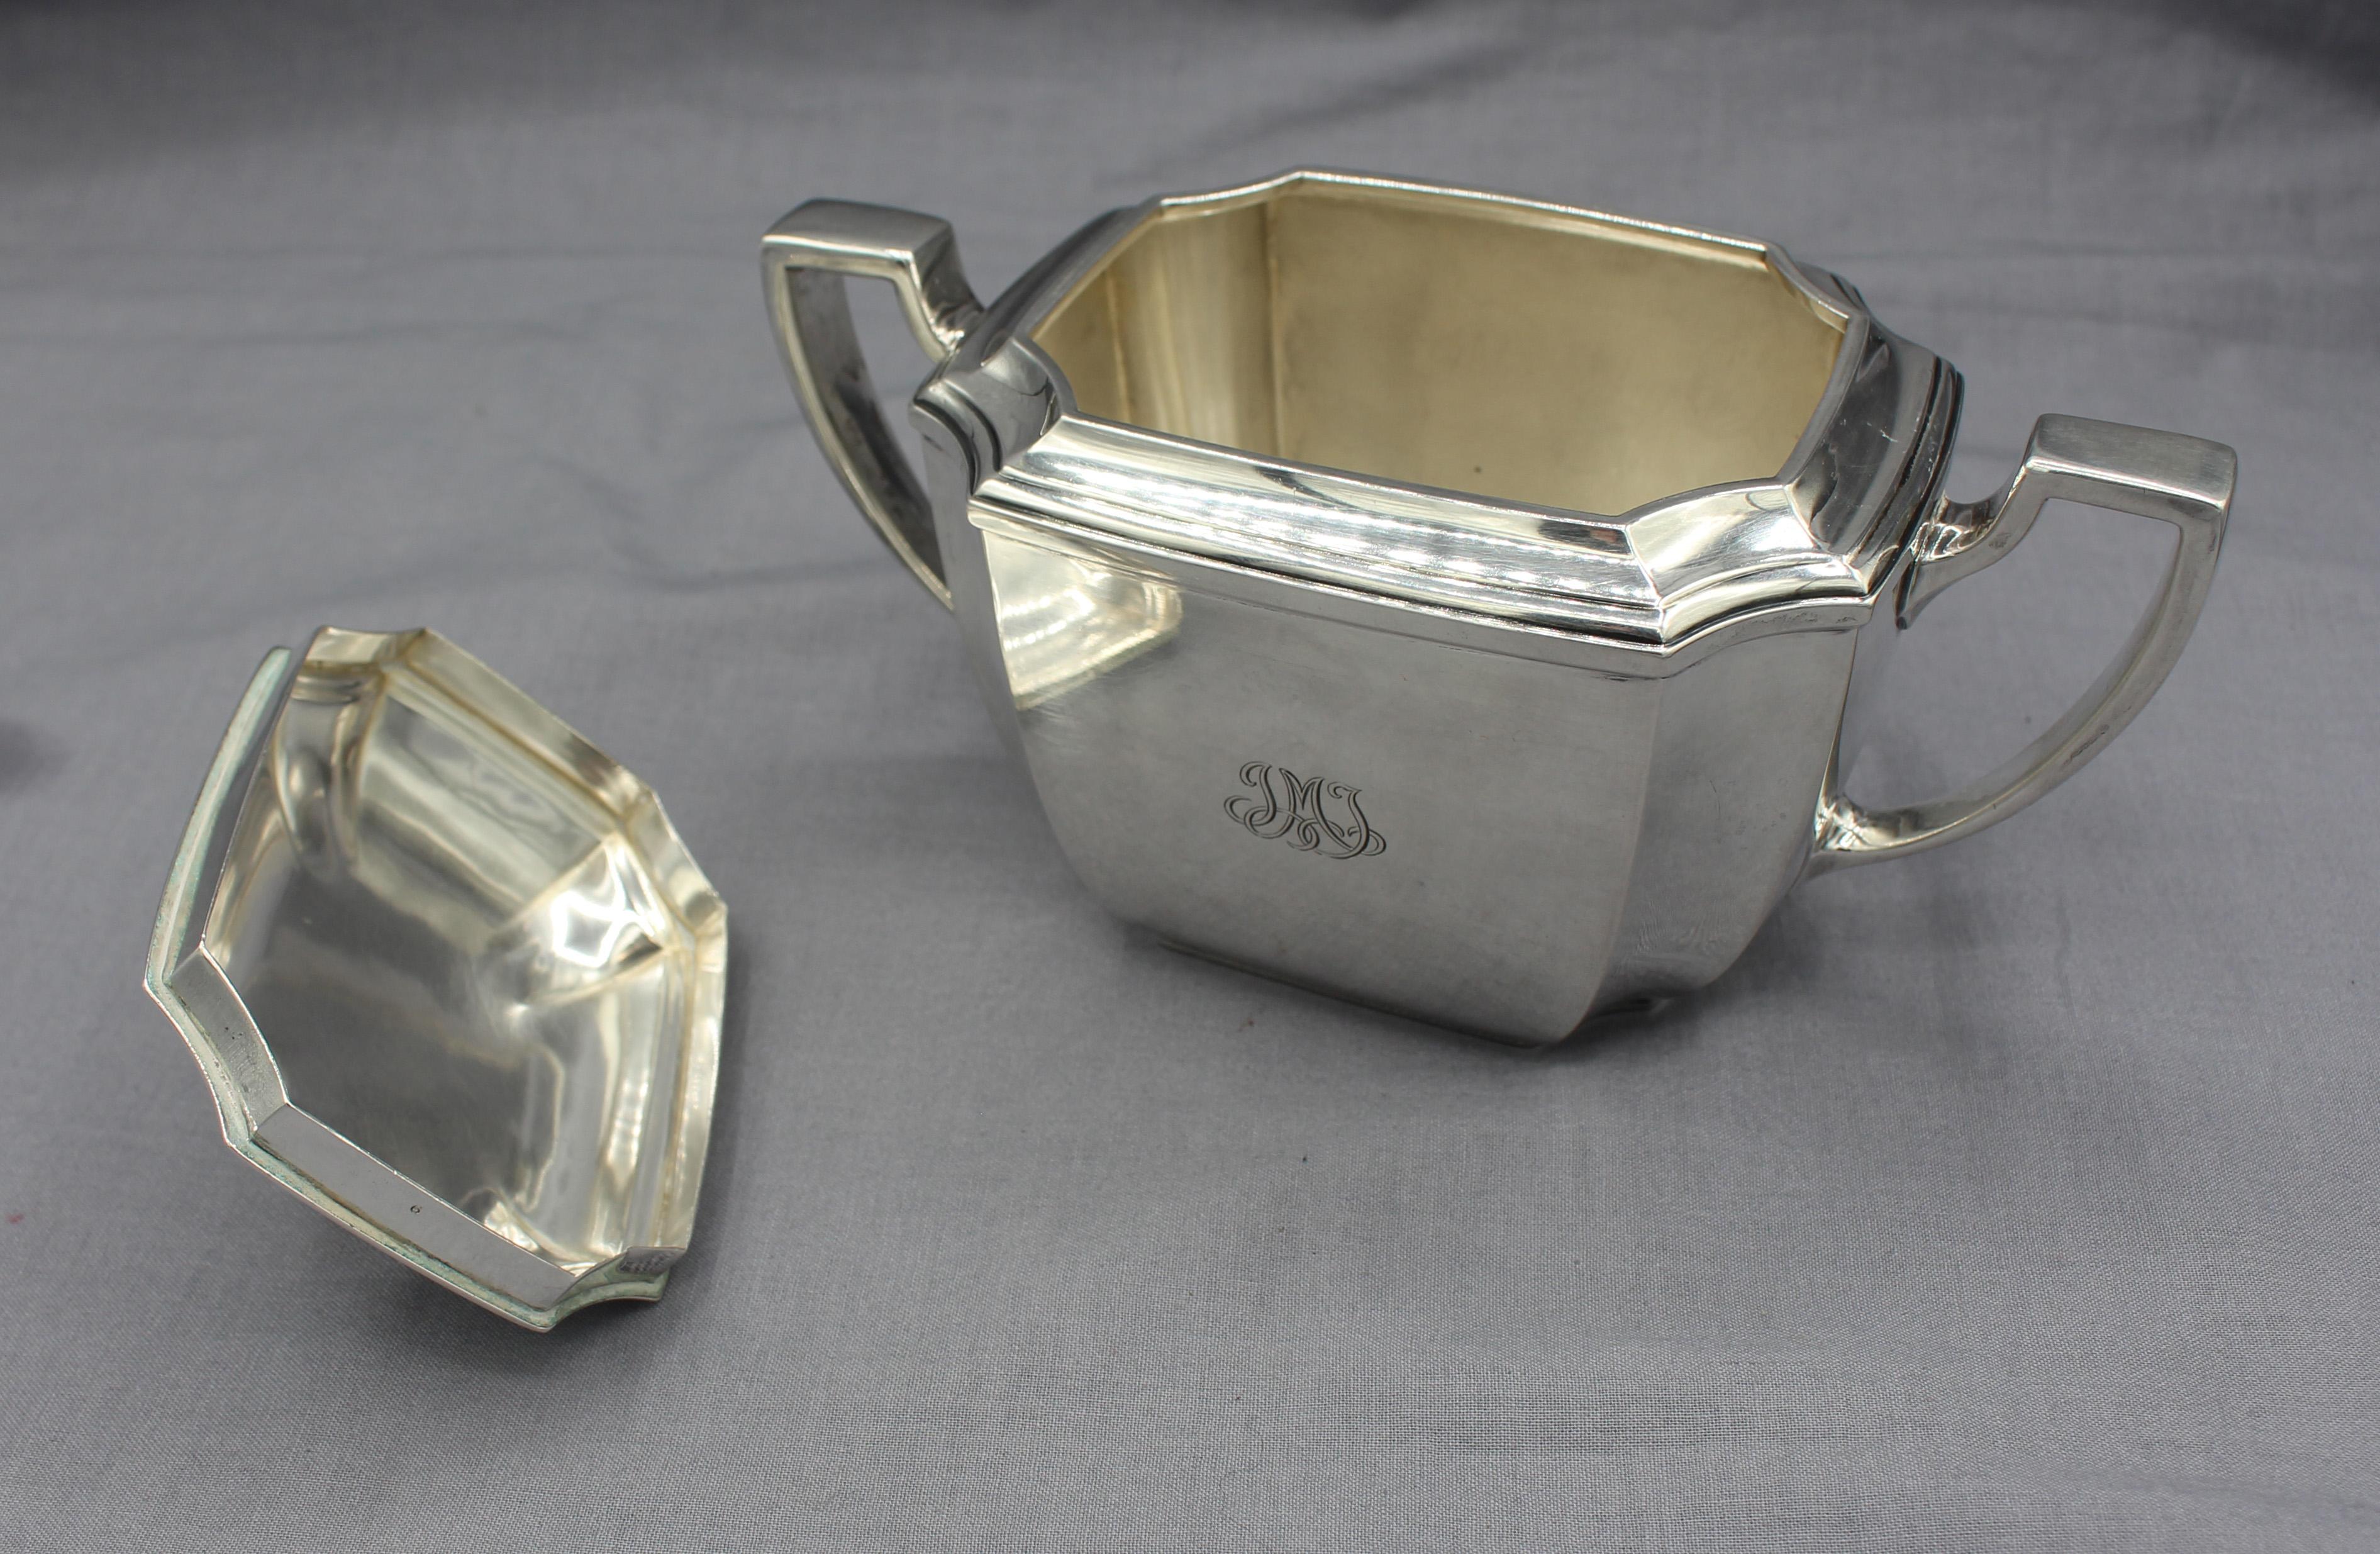 c. 1920s-30s 4-Piece Sterling Silver Tea Service by Tiffany For Sale 1